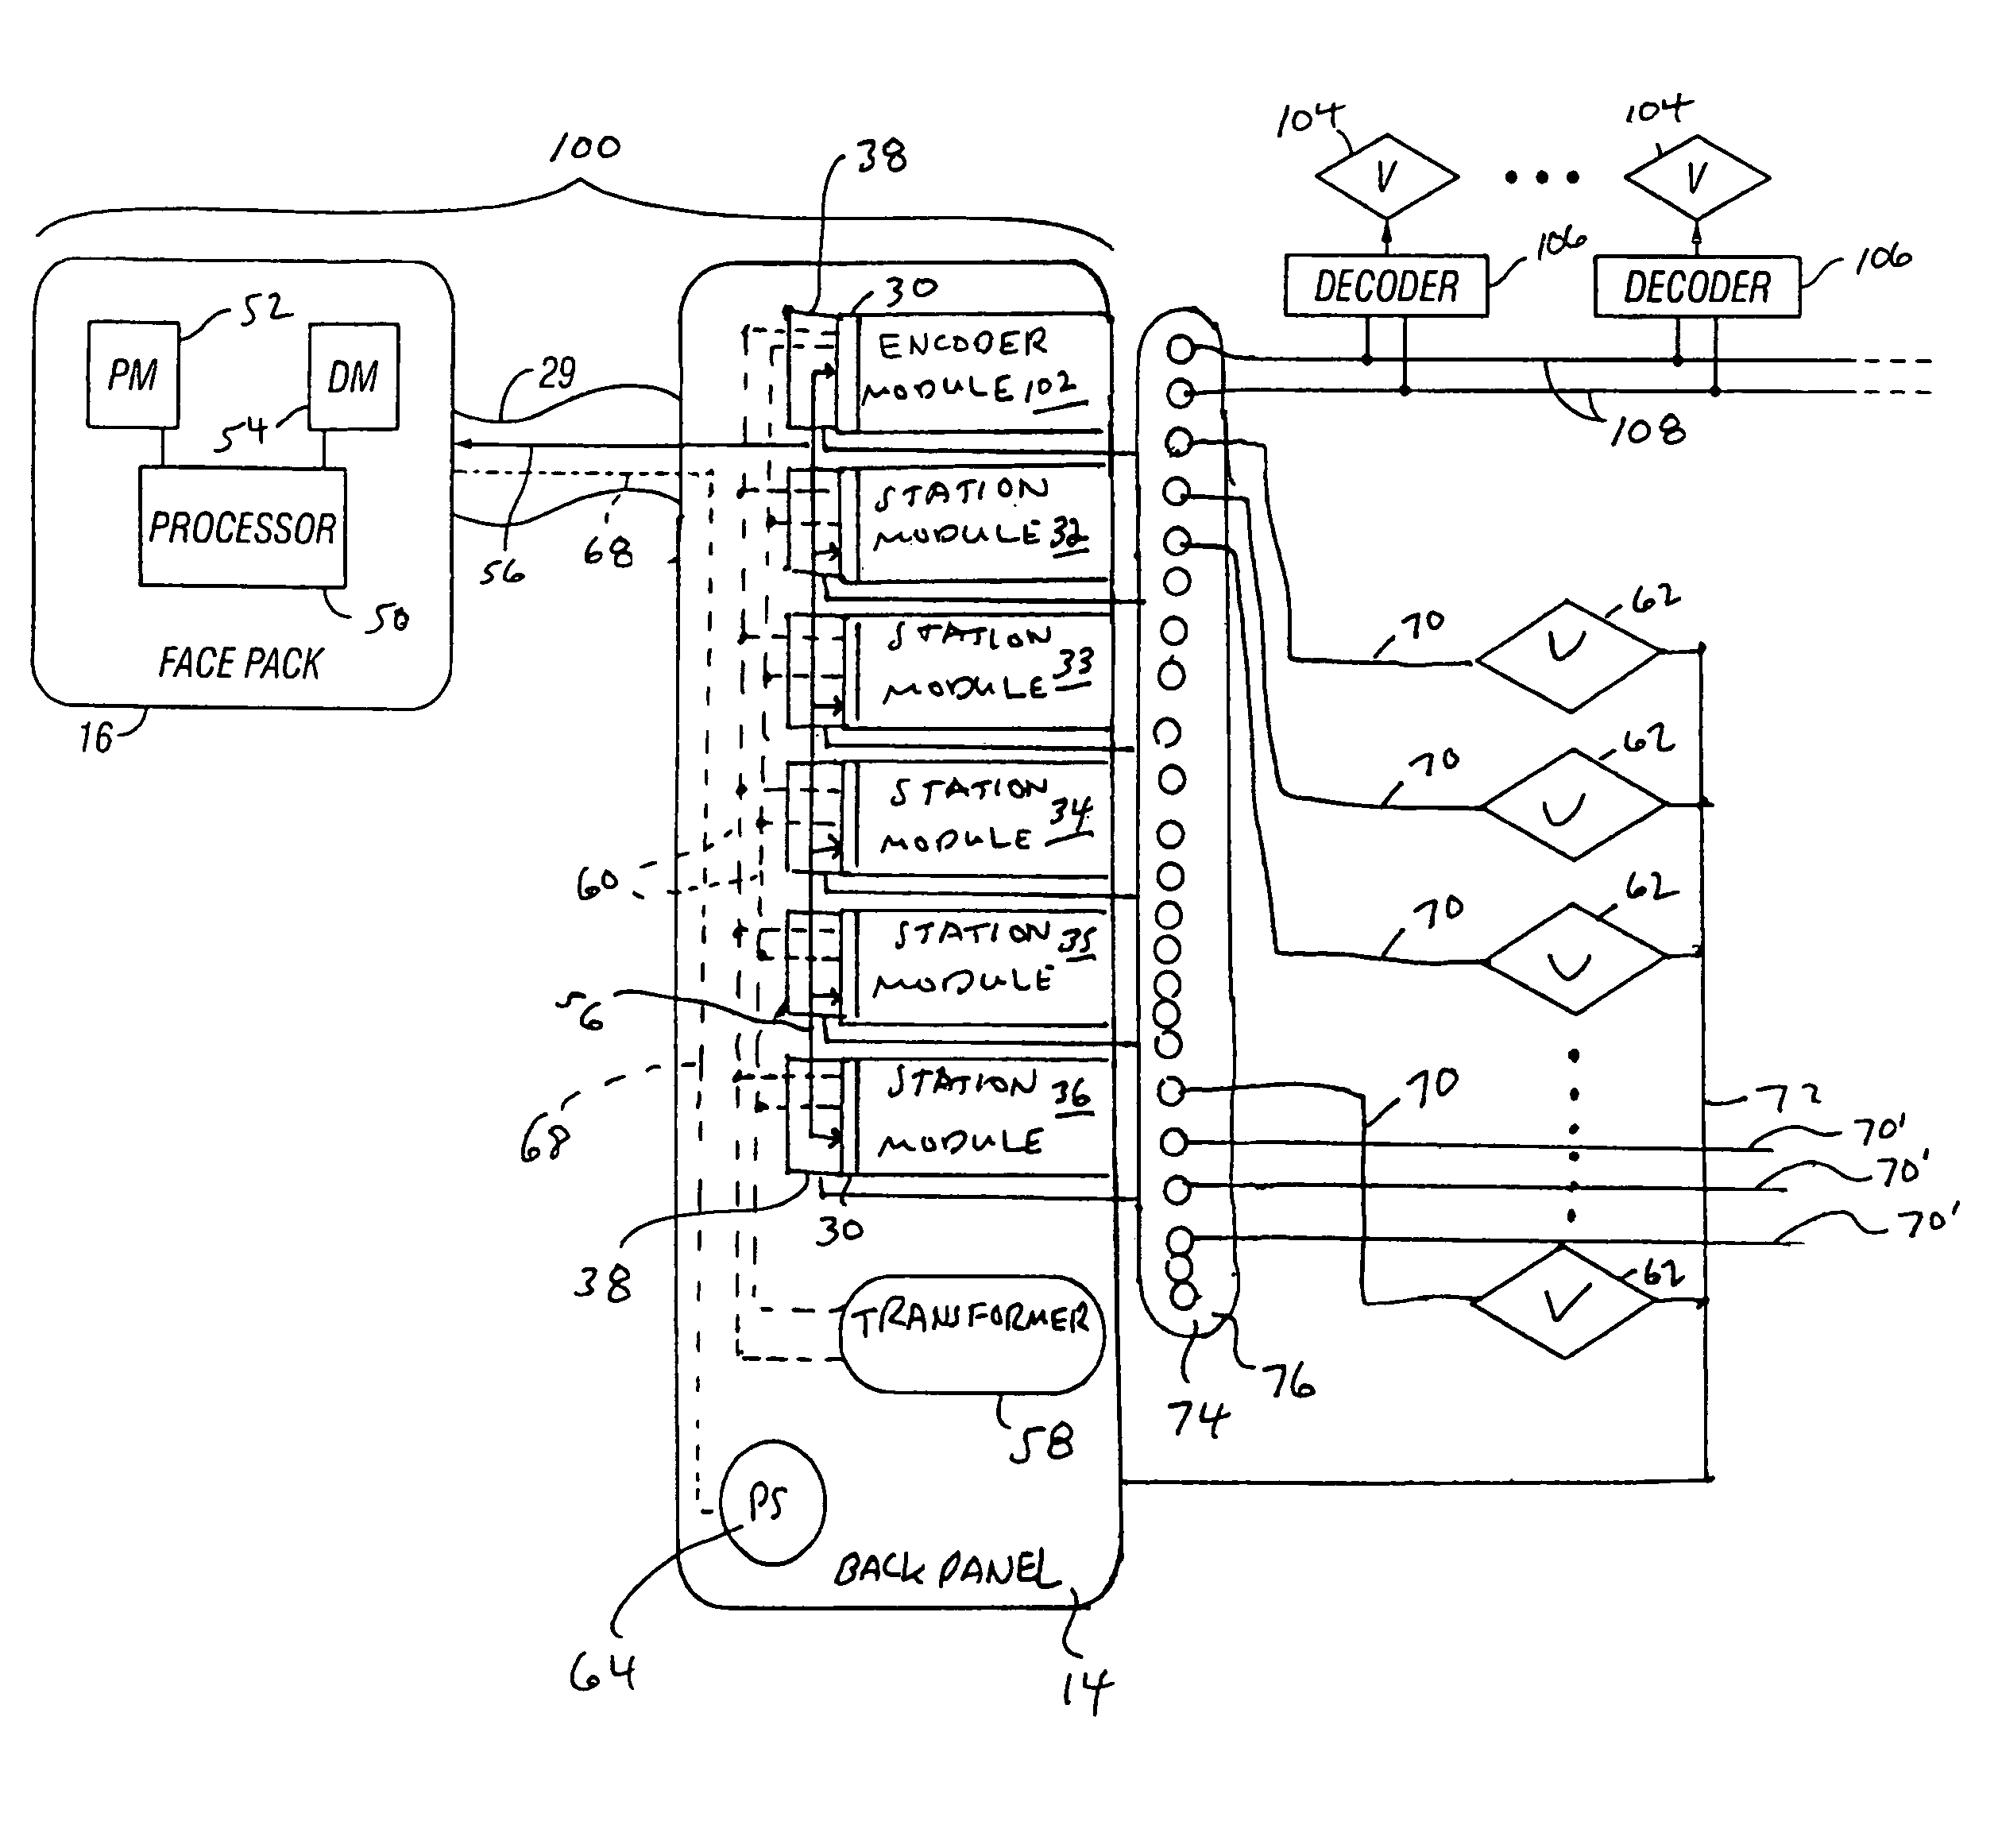 Modular irrigation controller with separate field valve line wiring terminals